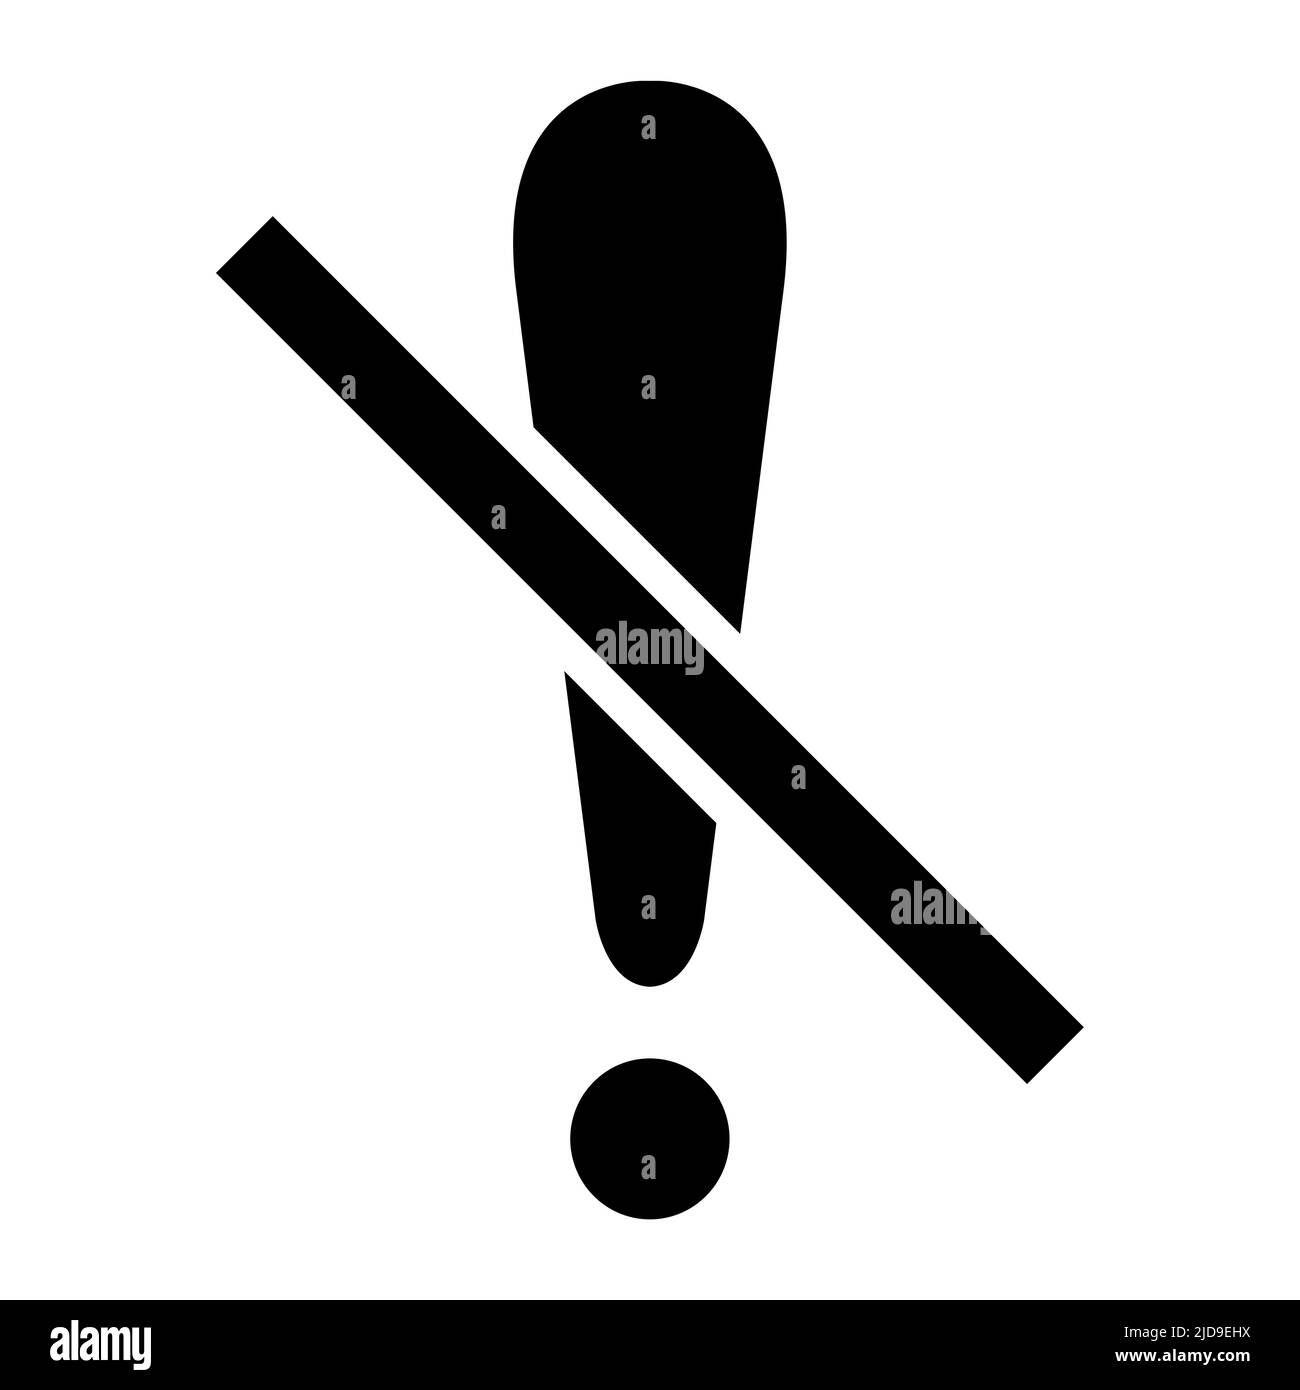 Warning Sign Isolate On White Background Stock Vector